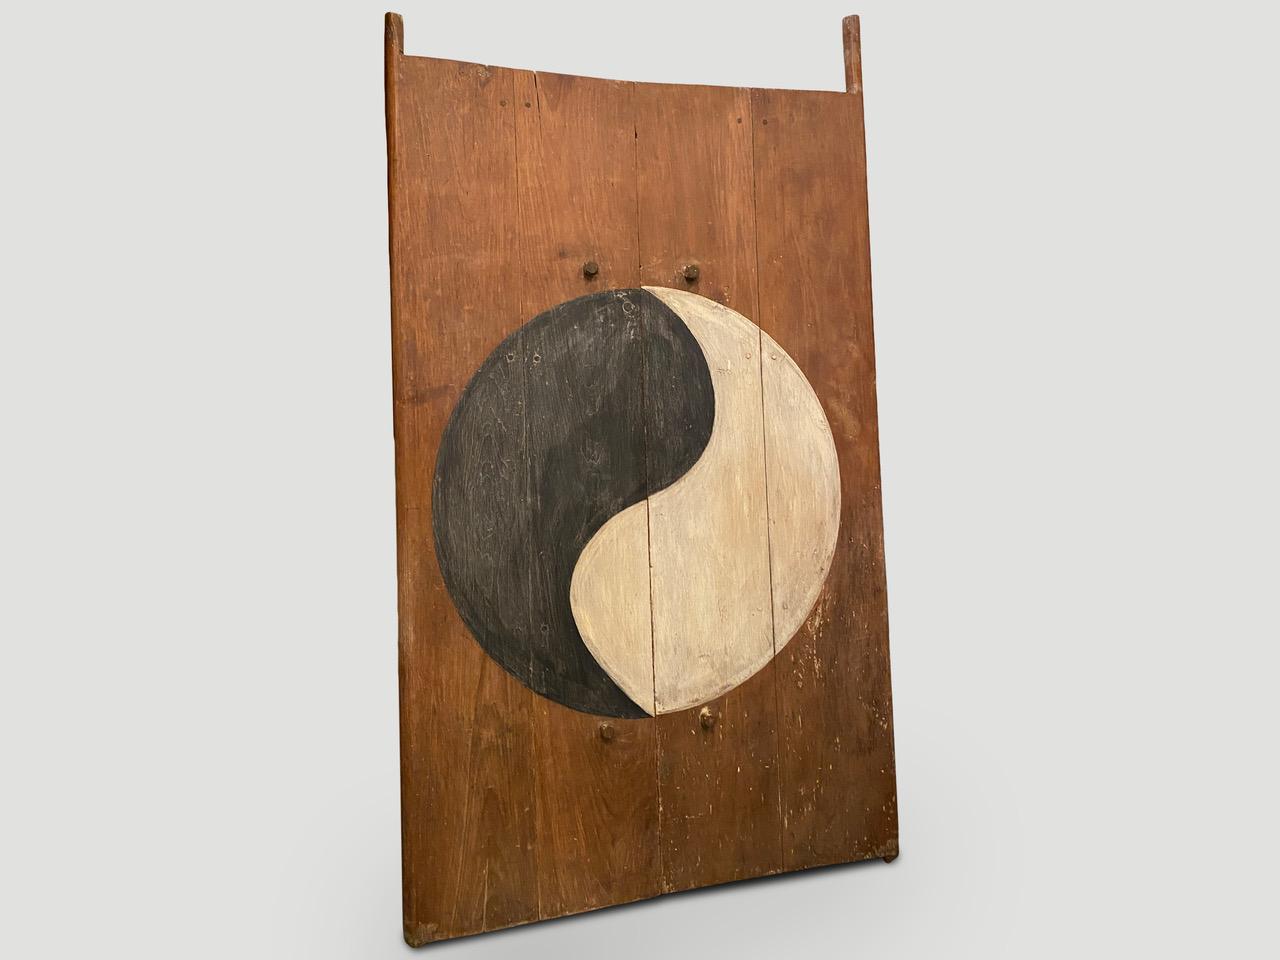 Andrianna Shamaris Yin and Yang Antique Door For Sale 5